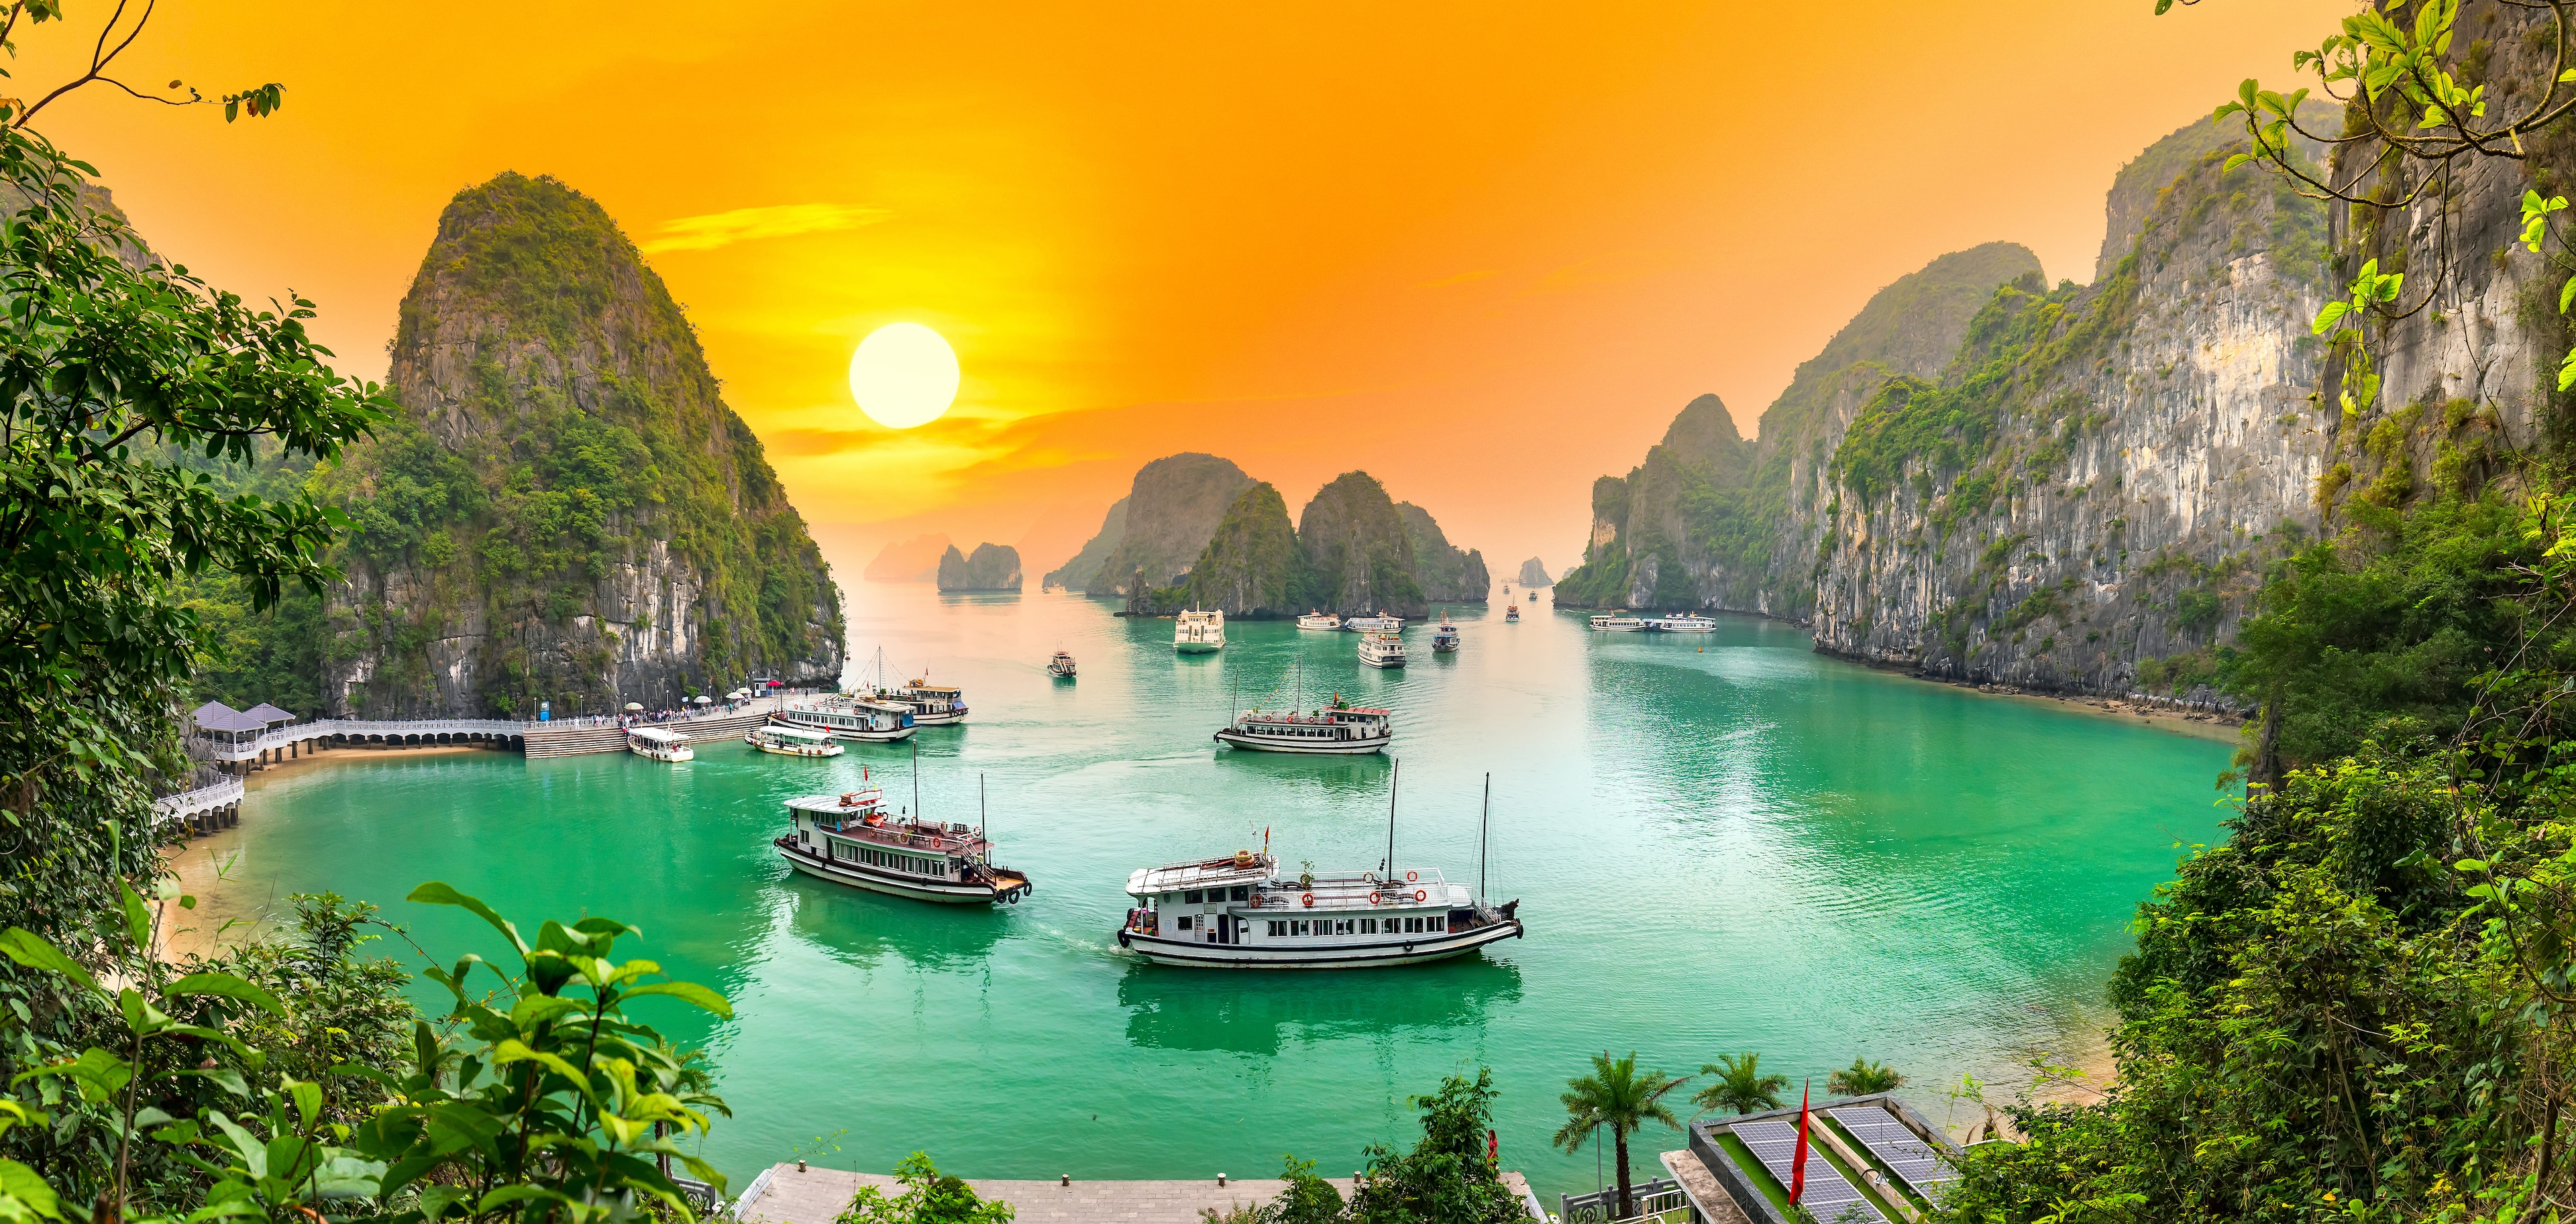 Visiting Vietnam? Here are 10 Things to Do to Have a Blast on your Trip!